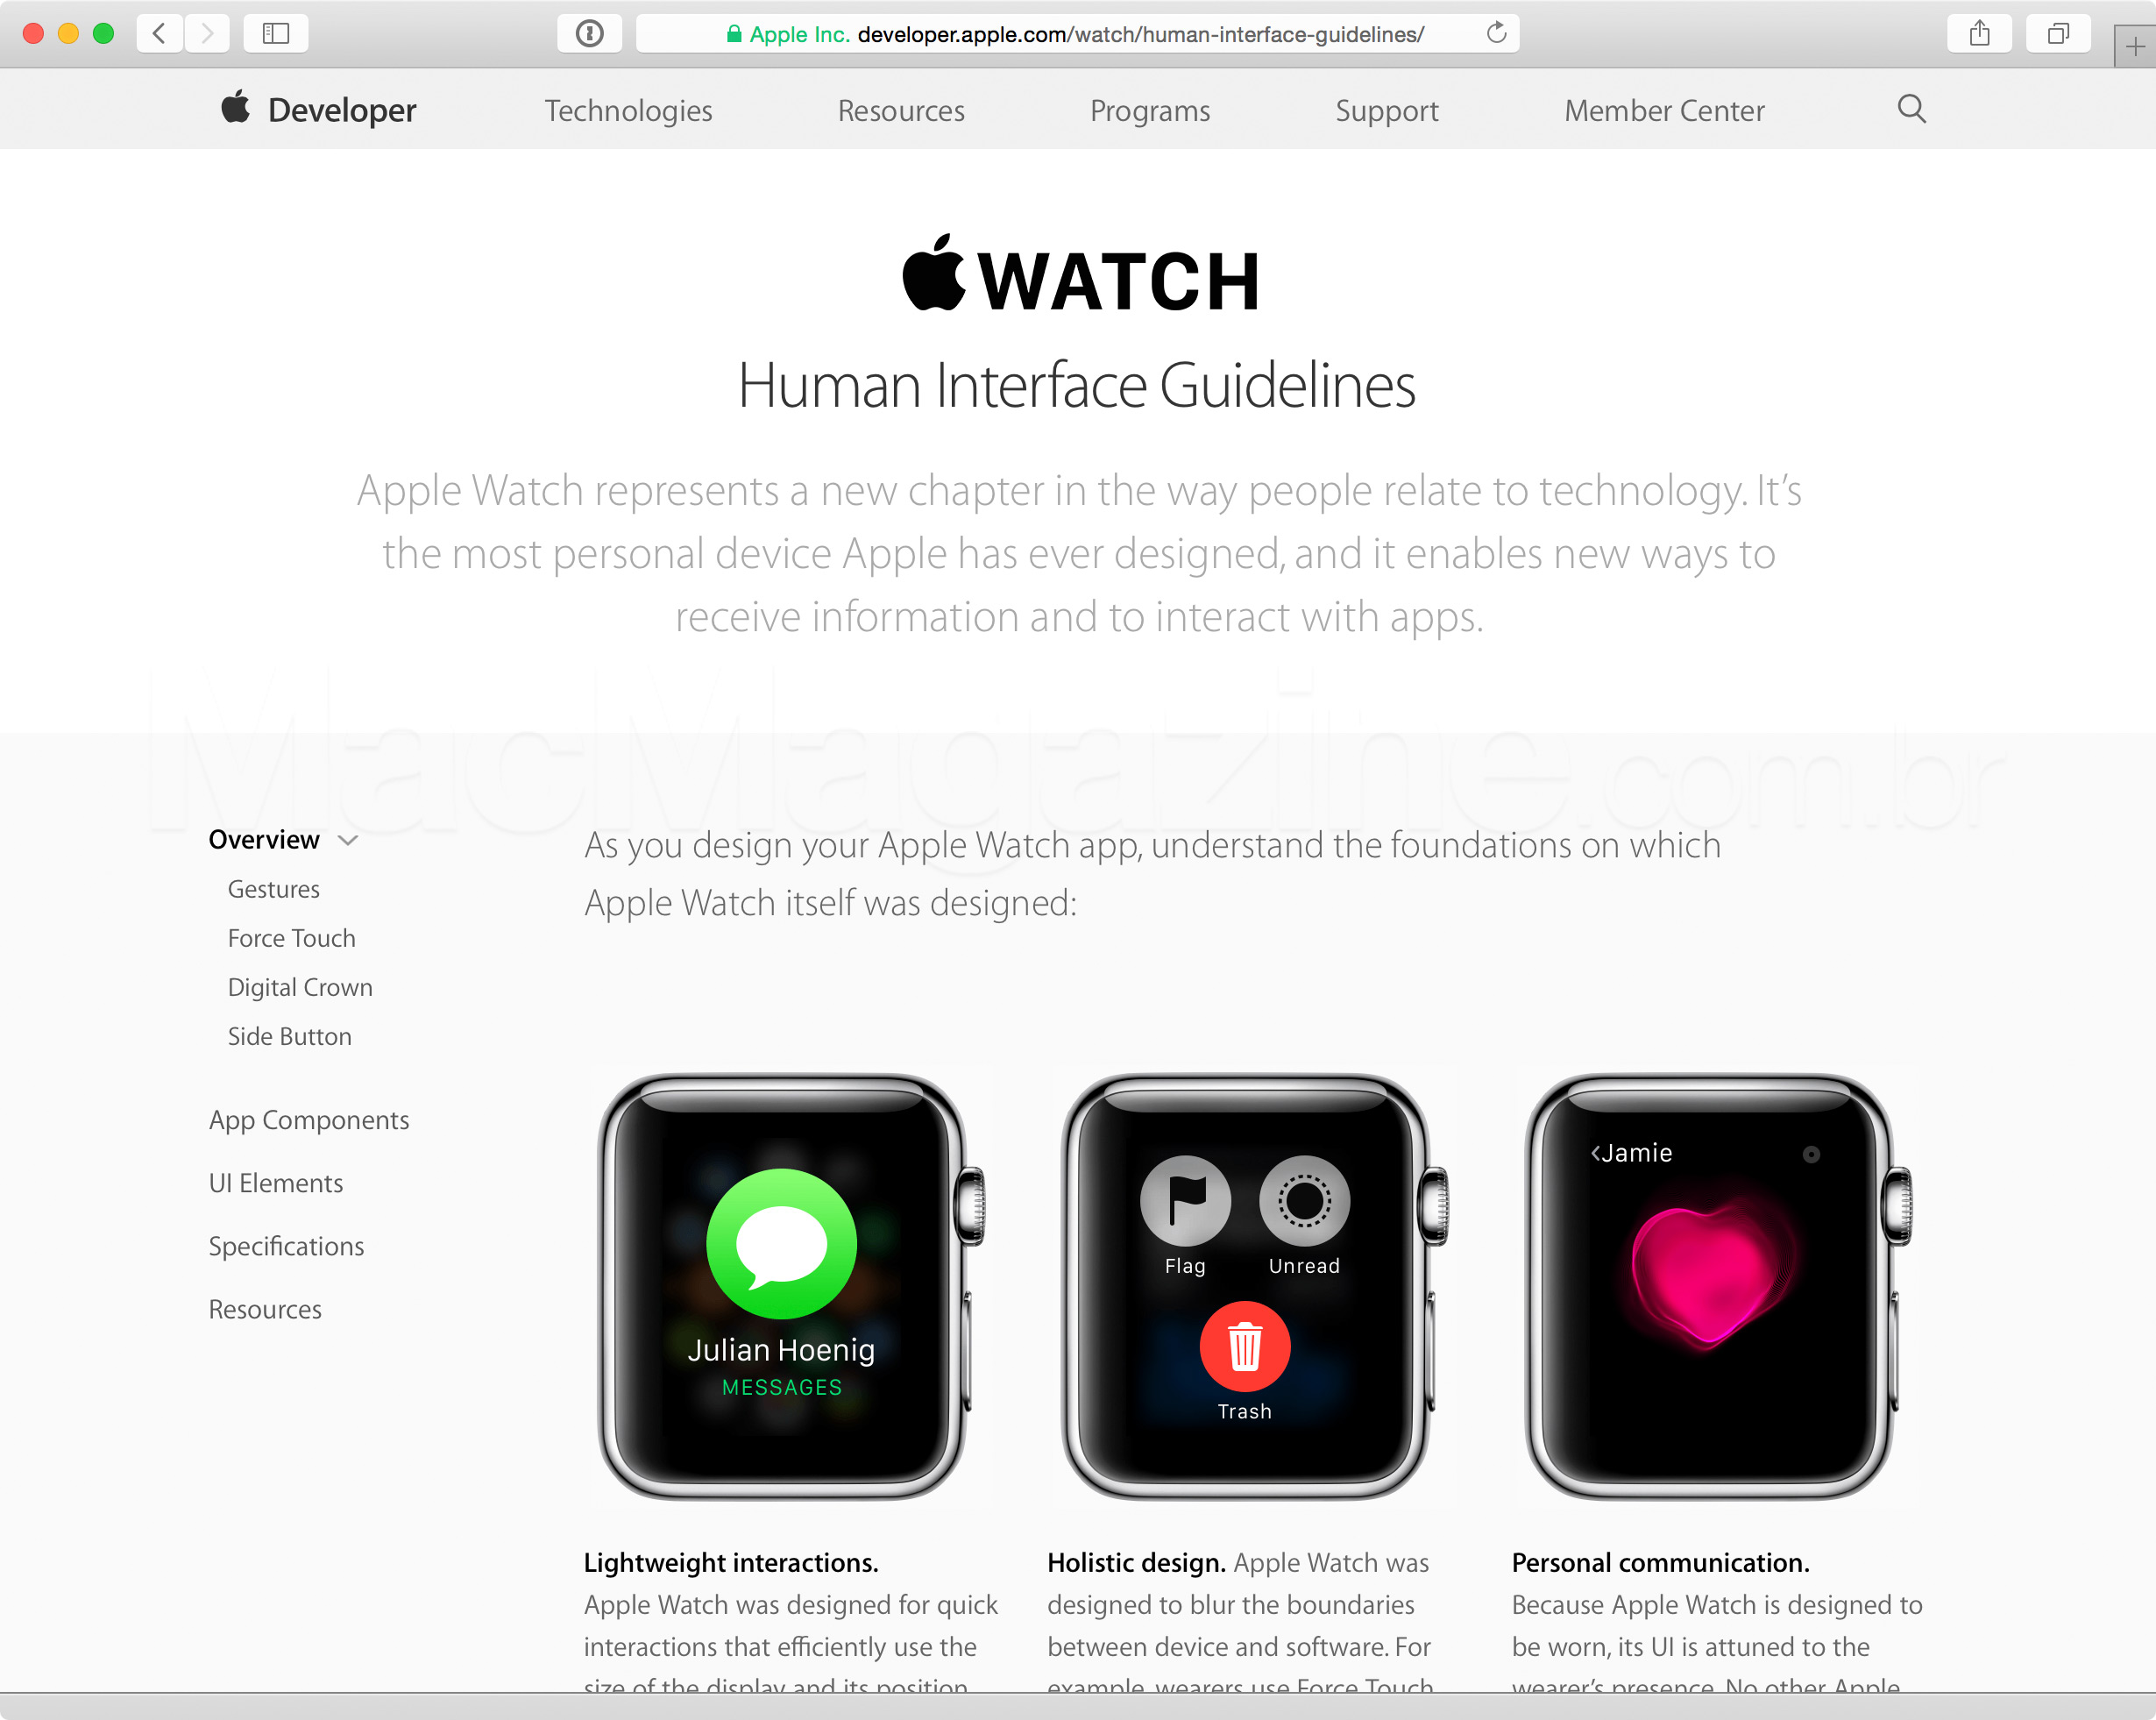 Apple Watch - Human Interface Guidelines